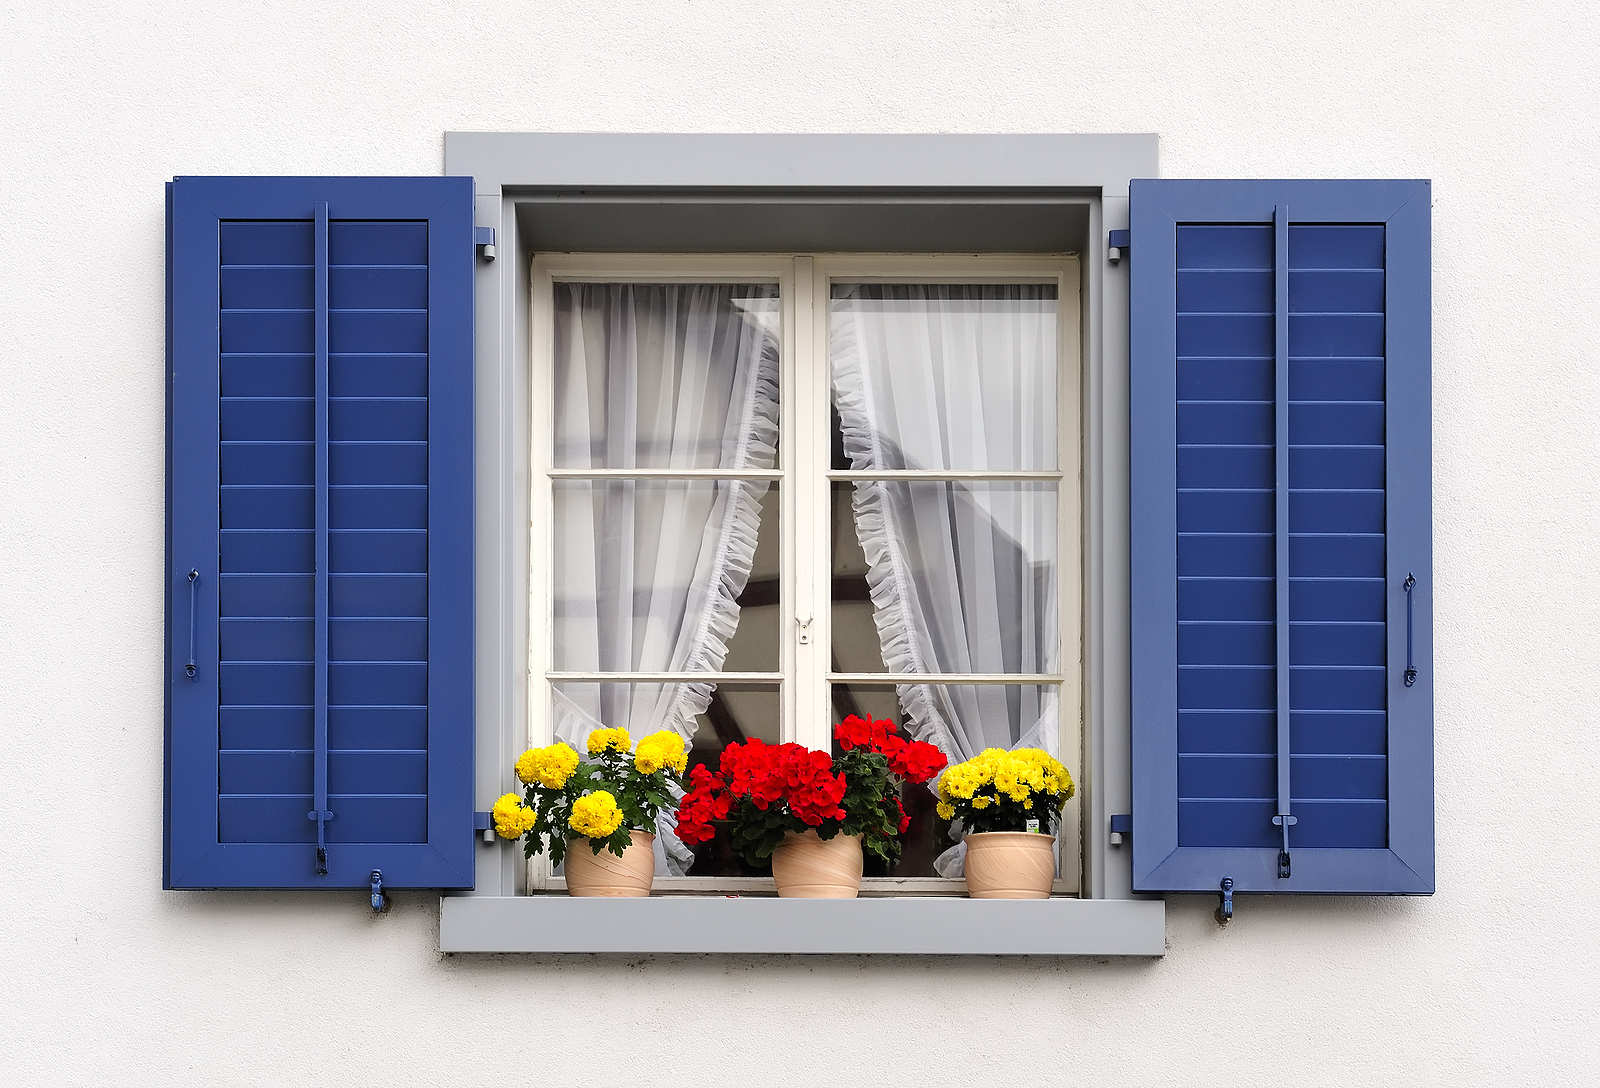 solid wood shutters - windows with flowers in hanging flower pots